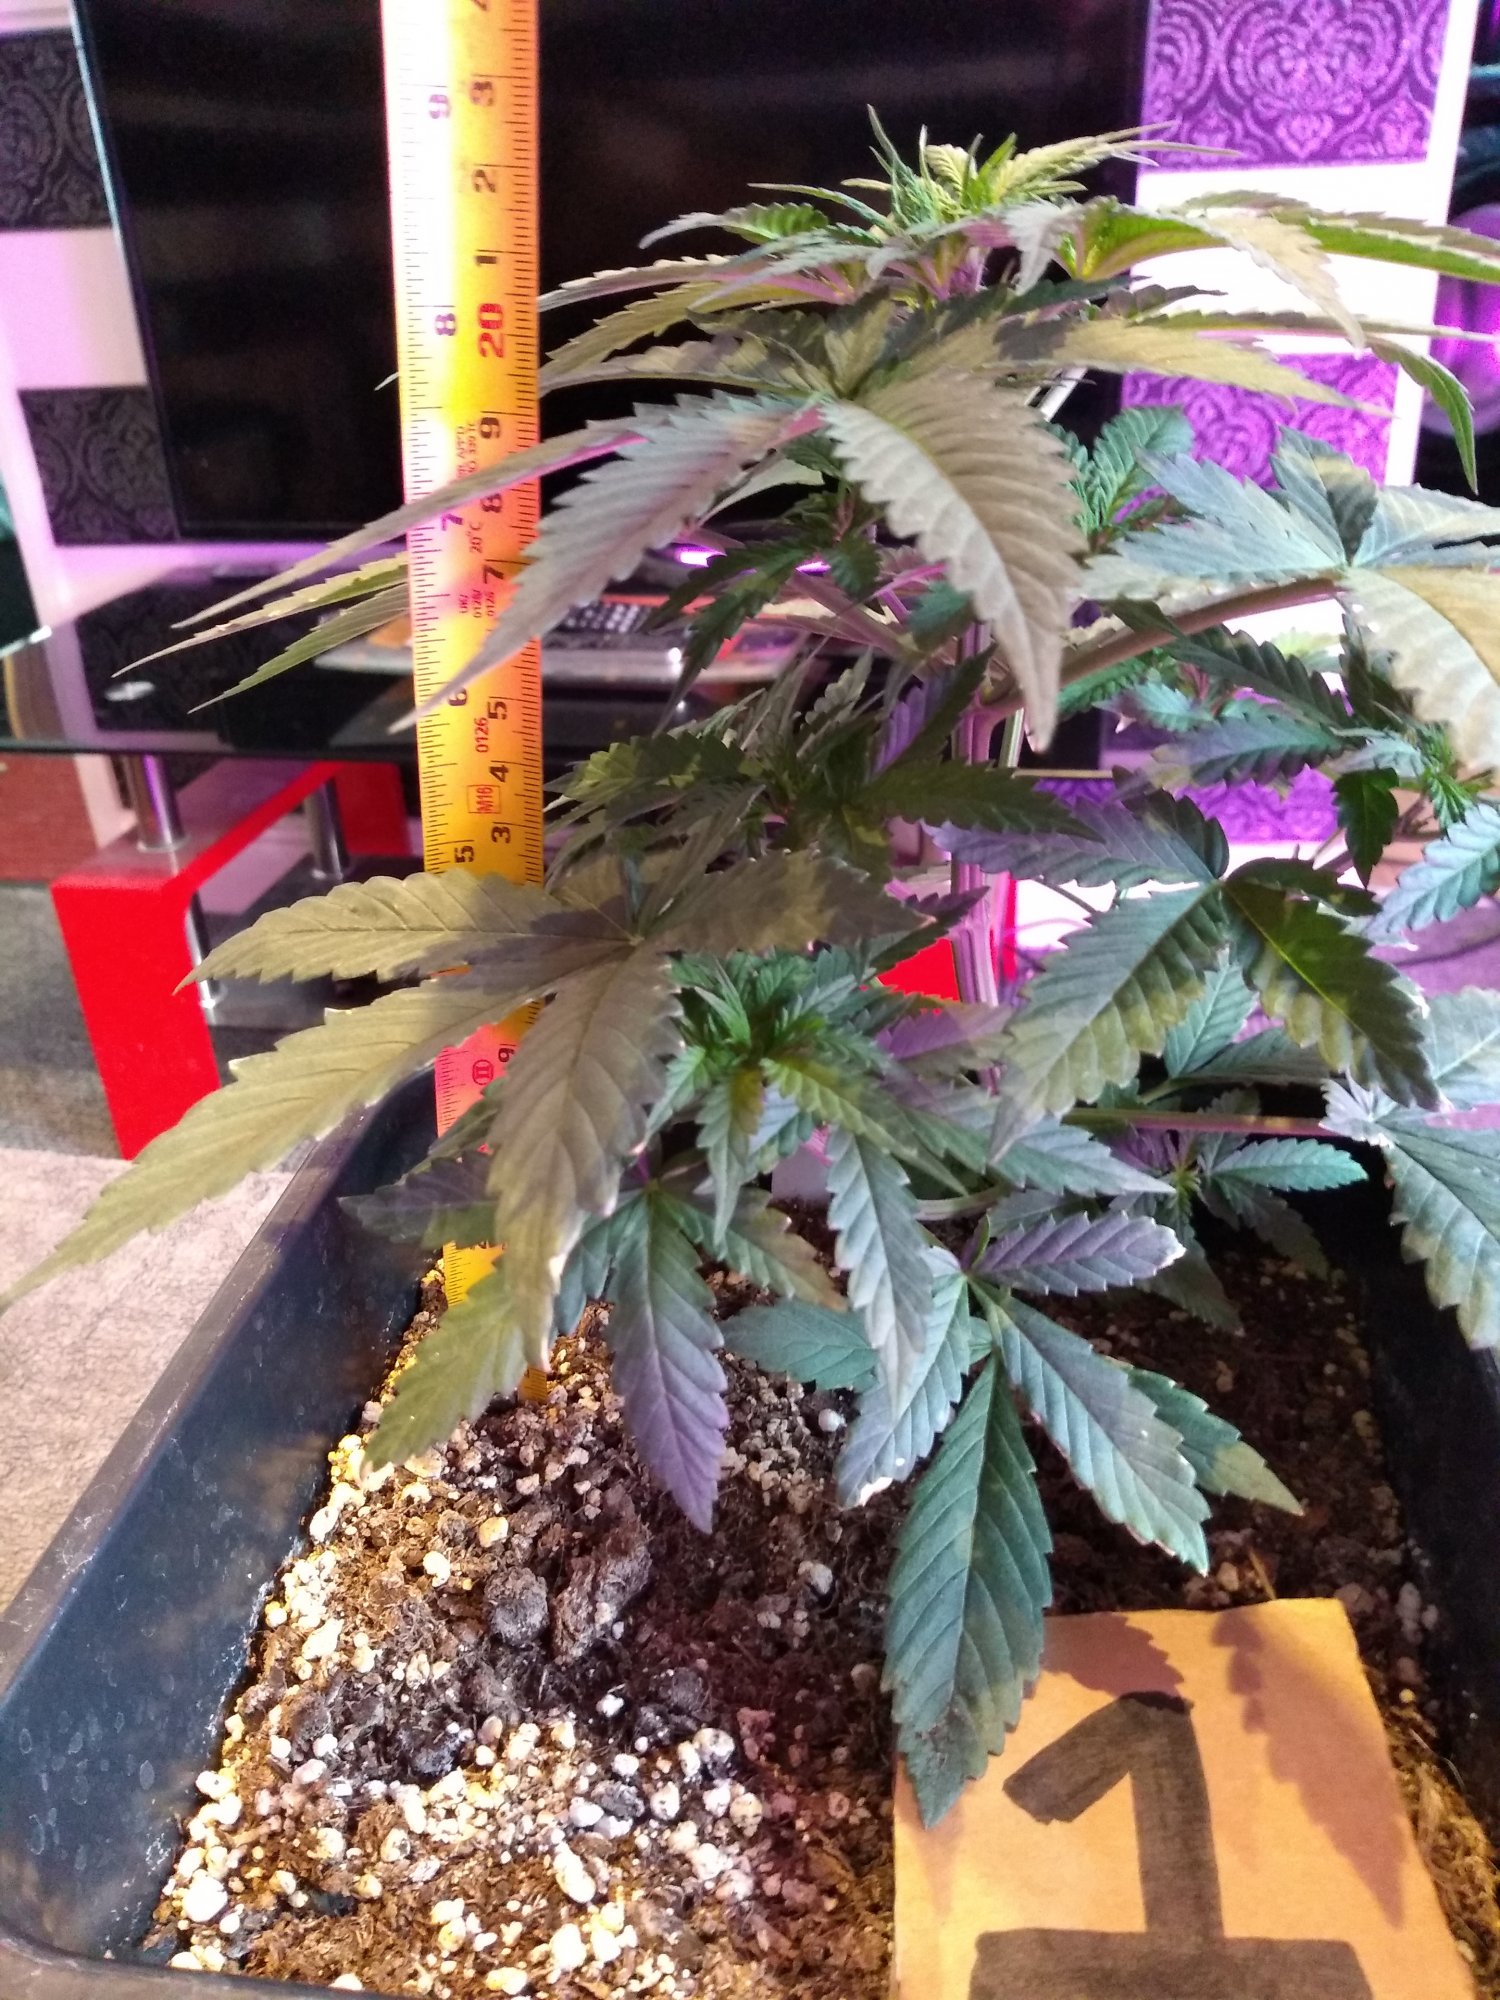 New grower   mistakes have been made 5